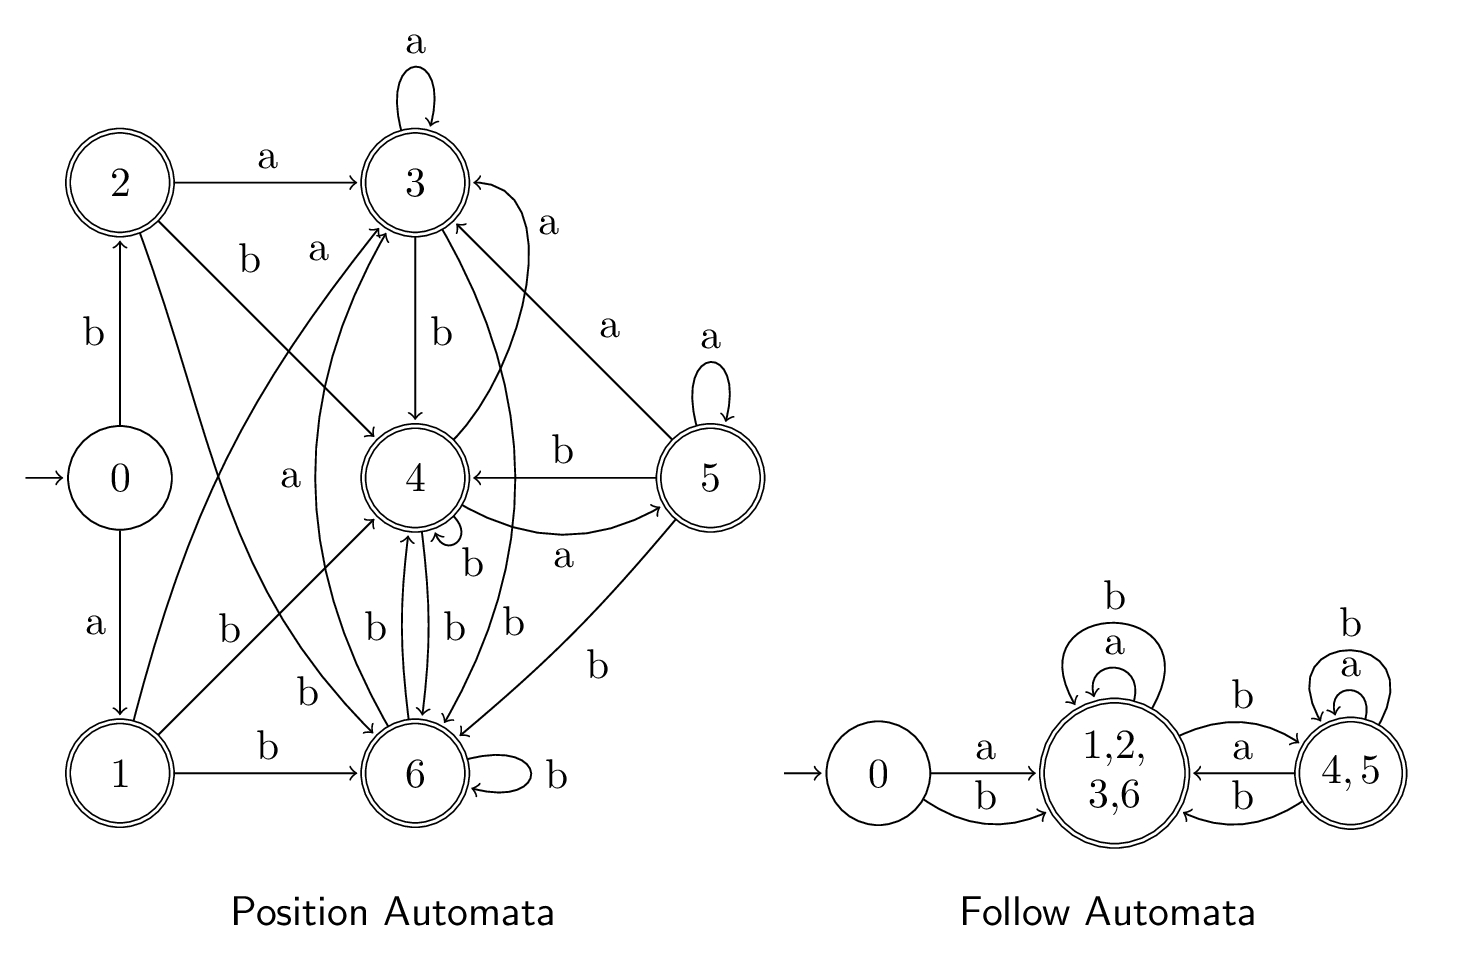 Position and Follow automata state diagrams for the regex (a|b)(a*|ab*|b*)*, the Position automata has 7 states, while the Follow automata has 3 states and is significantly less complex.